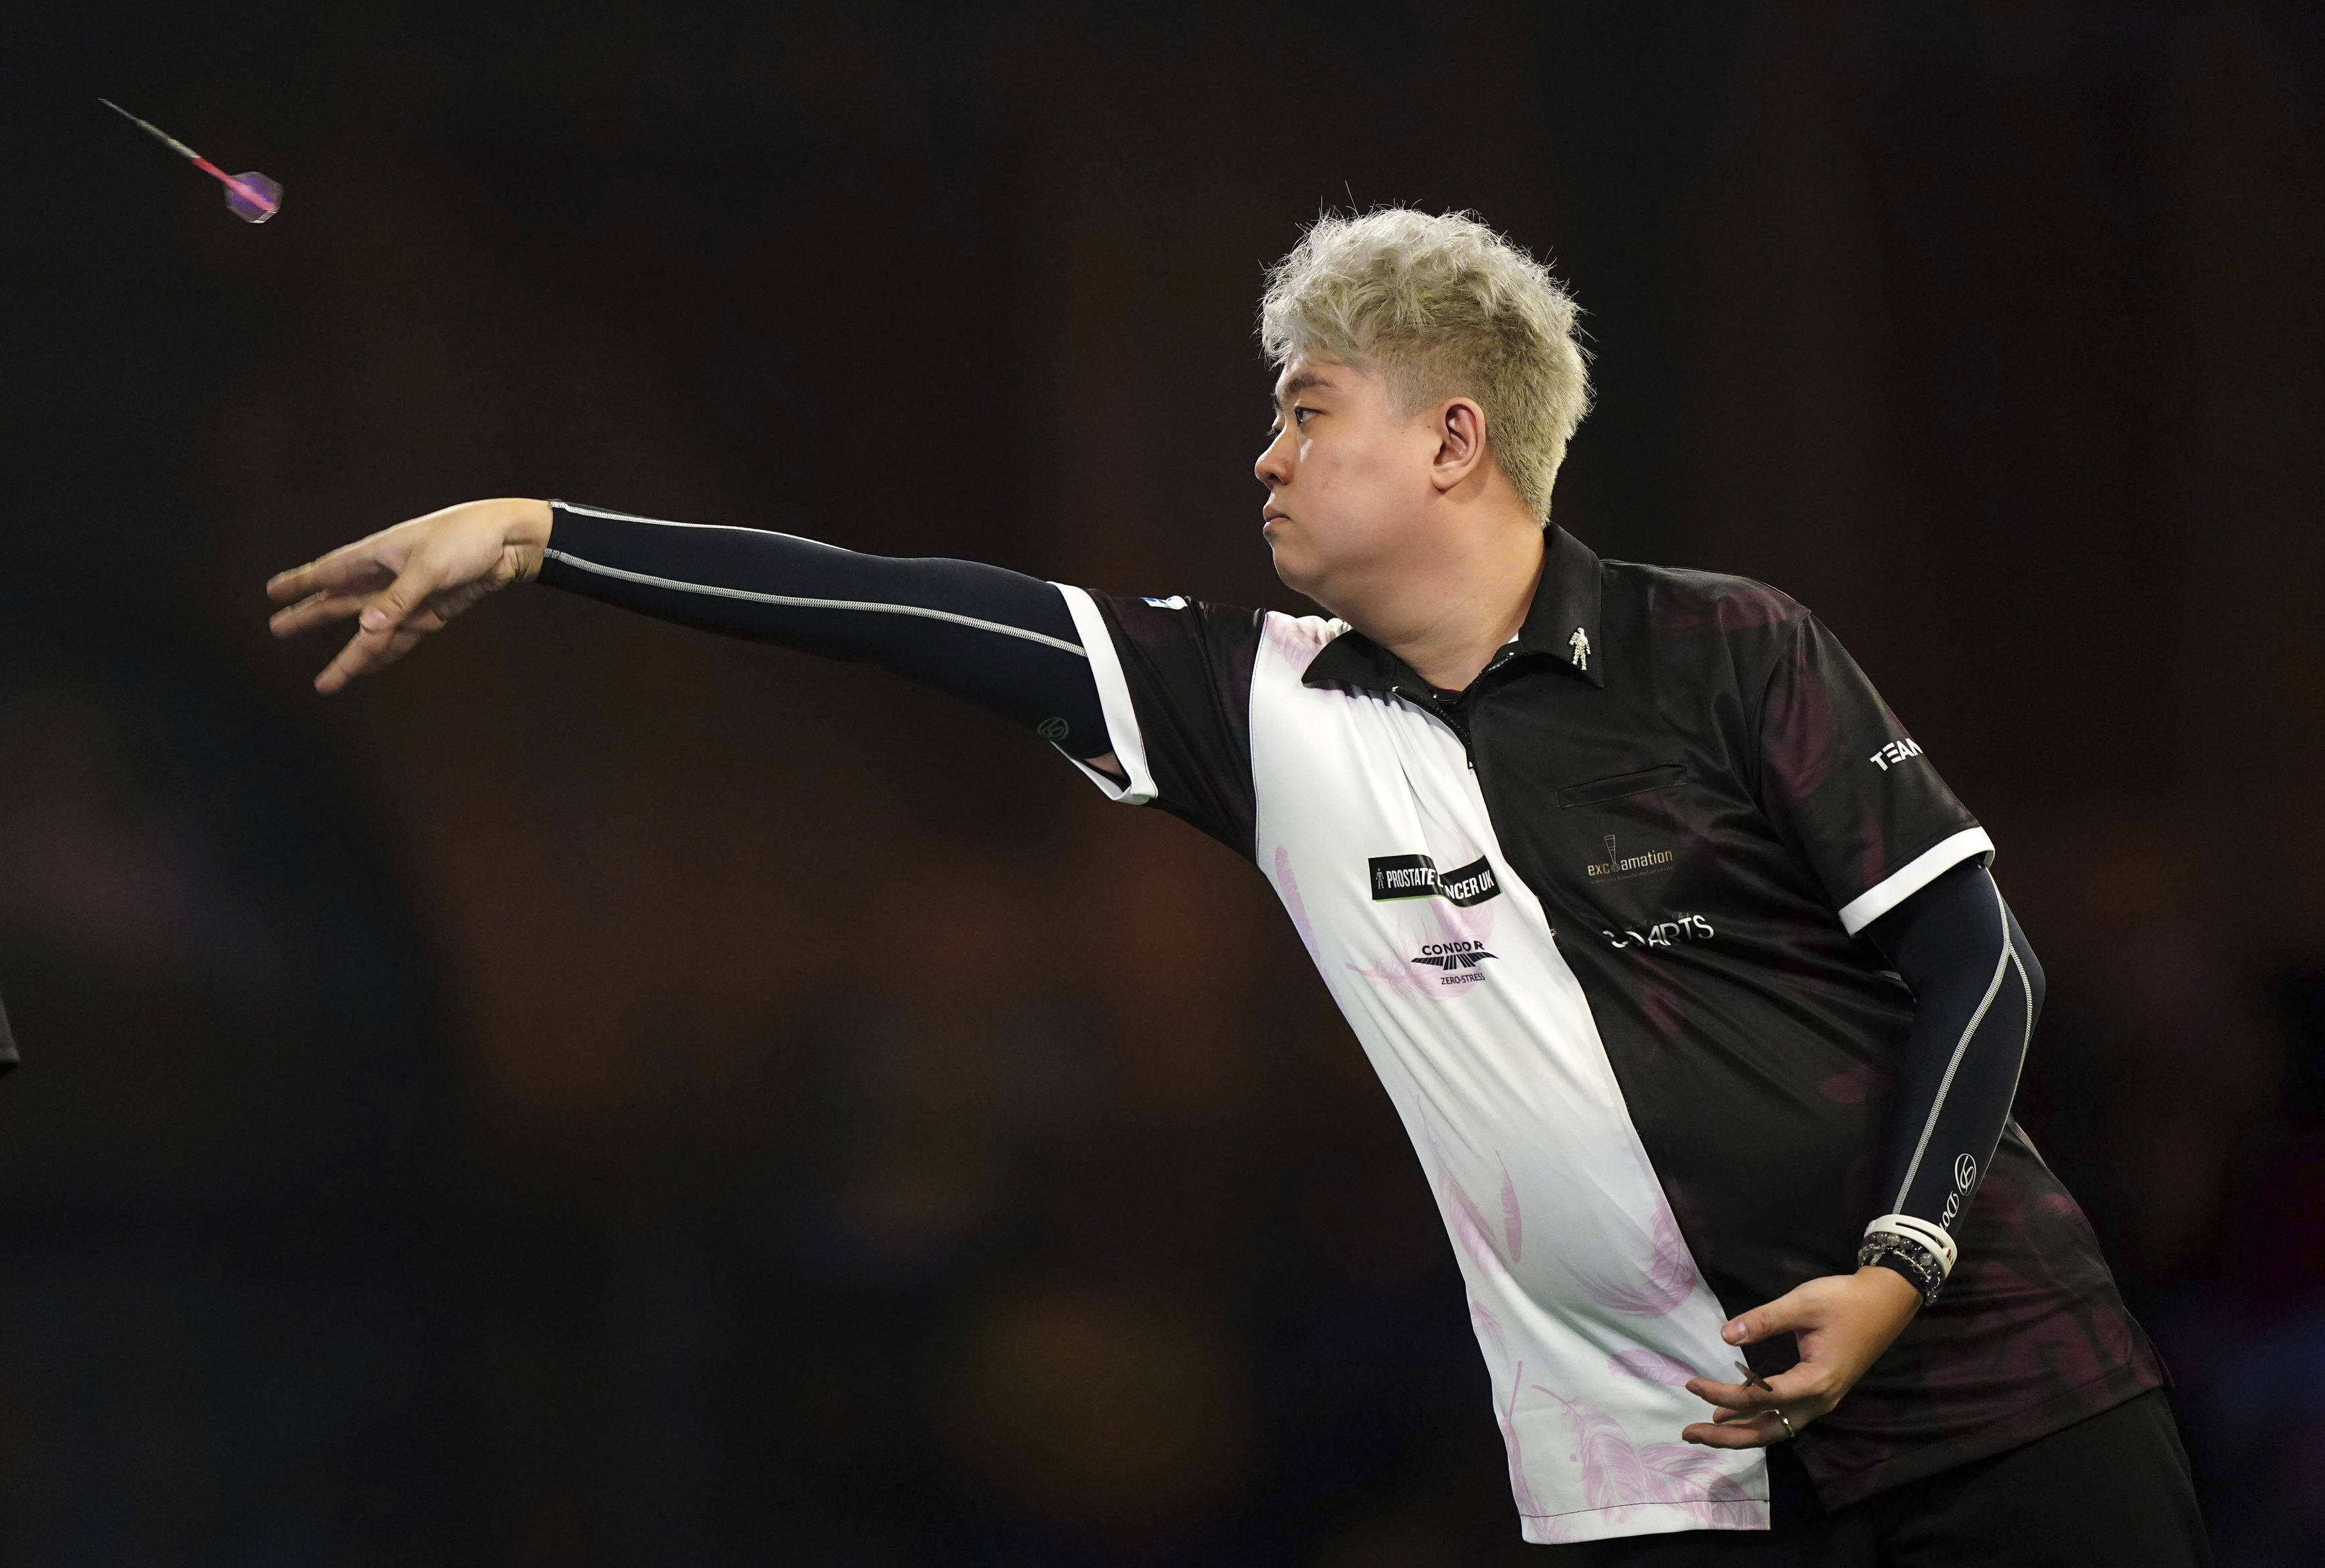 Hugo Leung Man-lok could not replicate his World Darts Championship first-round heroics, bowing out in round two after defeat by Gabriel Clemens. Photo: PA